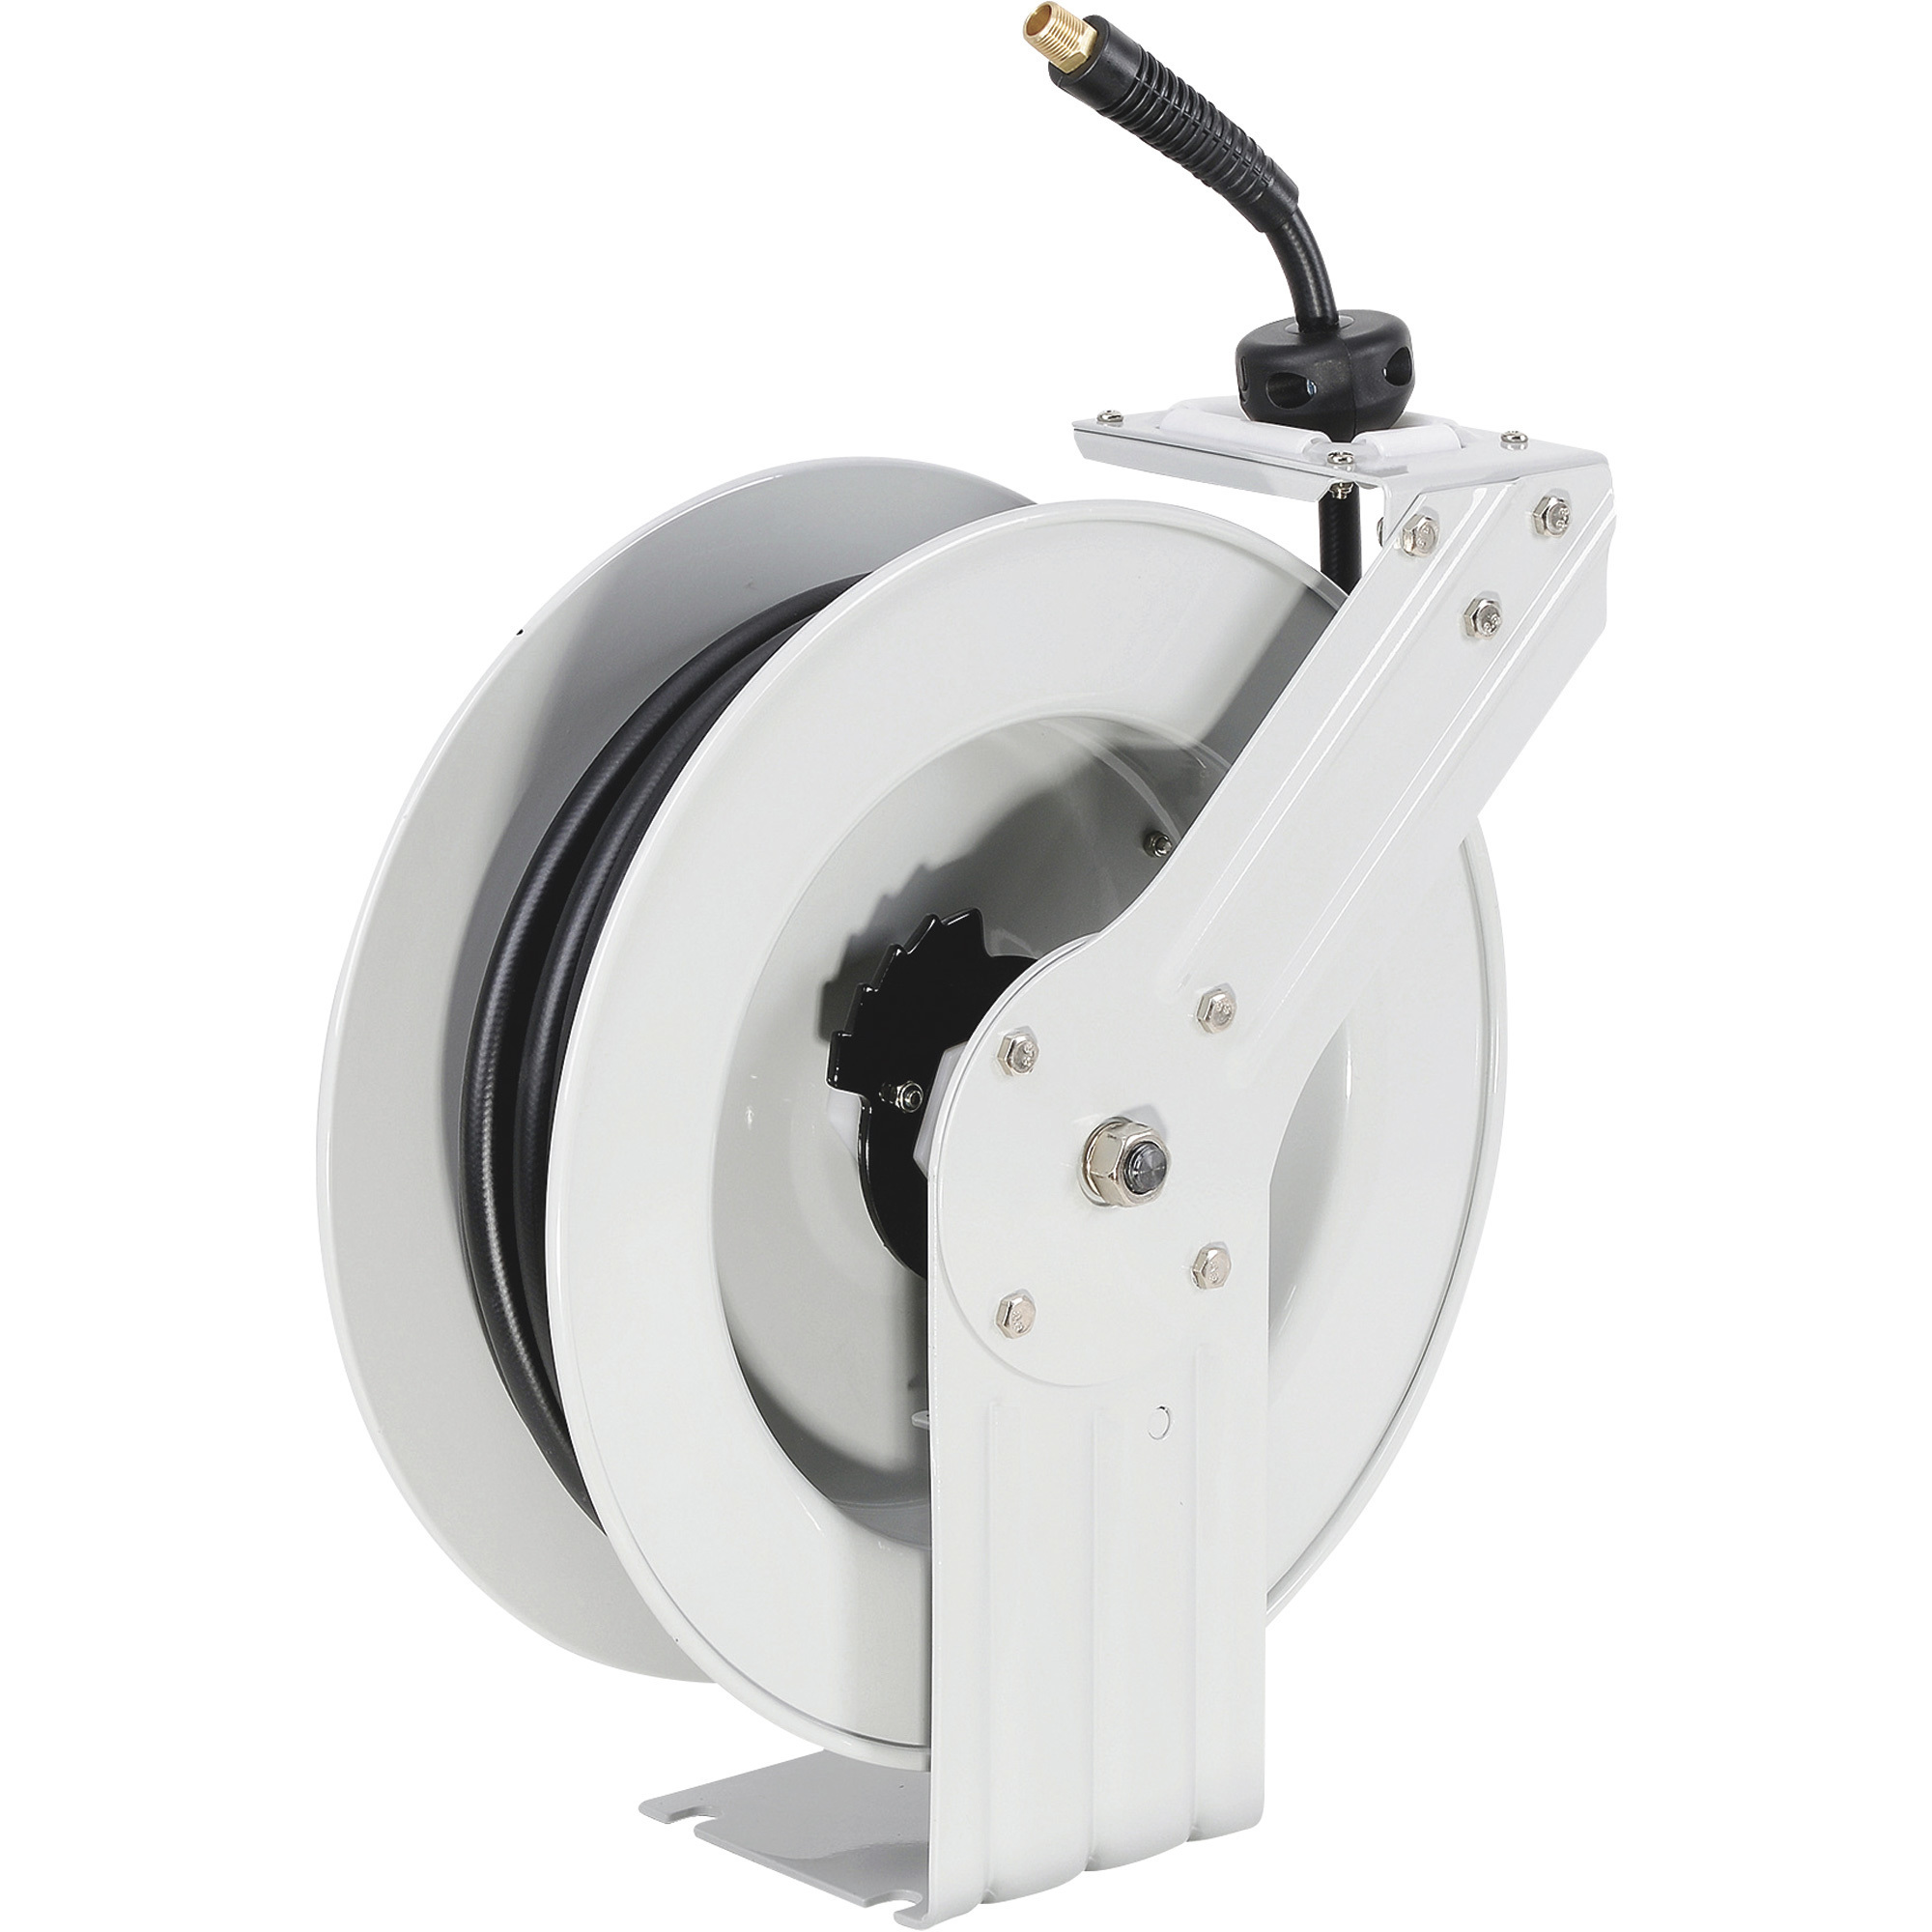 Klutch Auto Rewind Air Hose Reel - with 3/8in. x 50ft. Rubber Hose